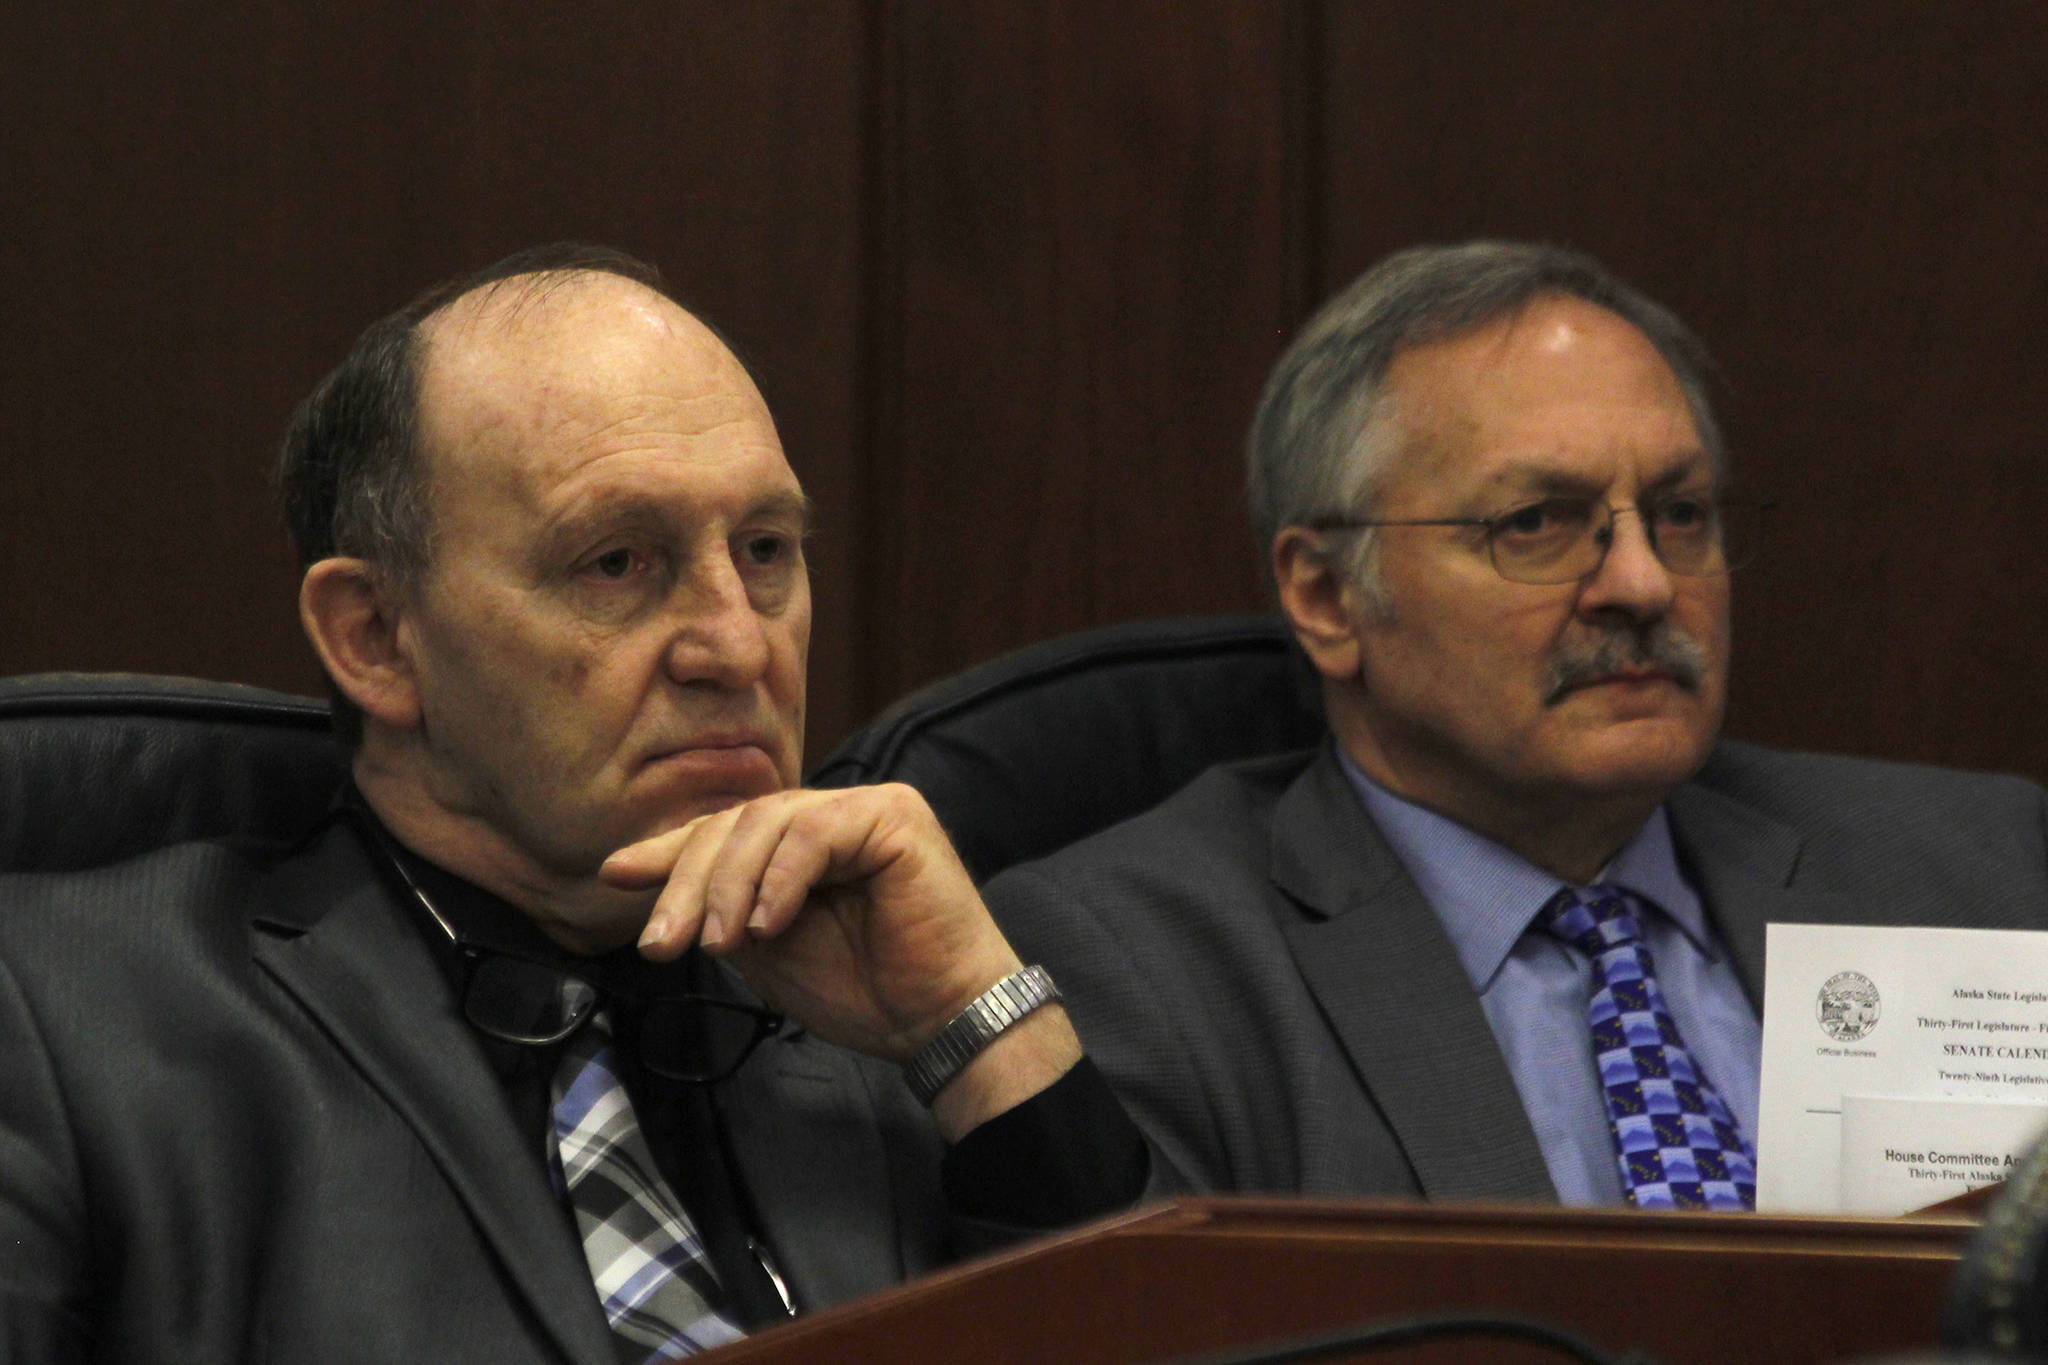 Rep. Gary Knopp, R-Kenai, and Rep. Dave Talerico, R-Healy, sit next to each other after Knopp voted not to confirm Talerico as Speaker of the House on Tuesday. (Alex McCarthy | Juneau Empire)